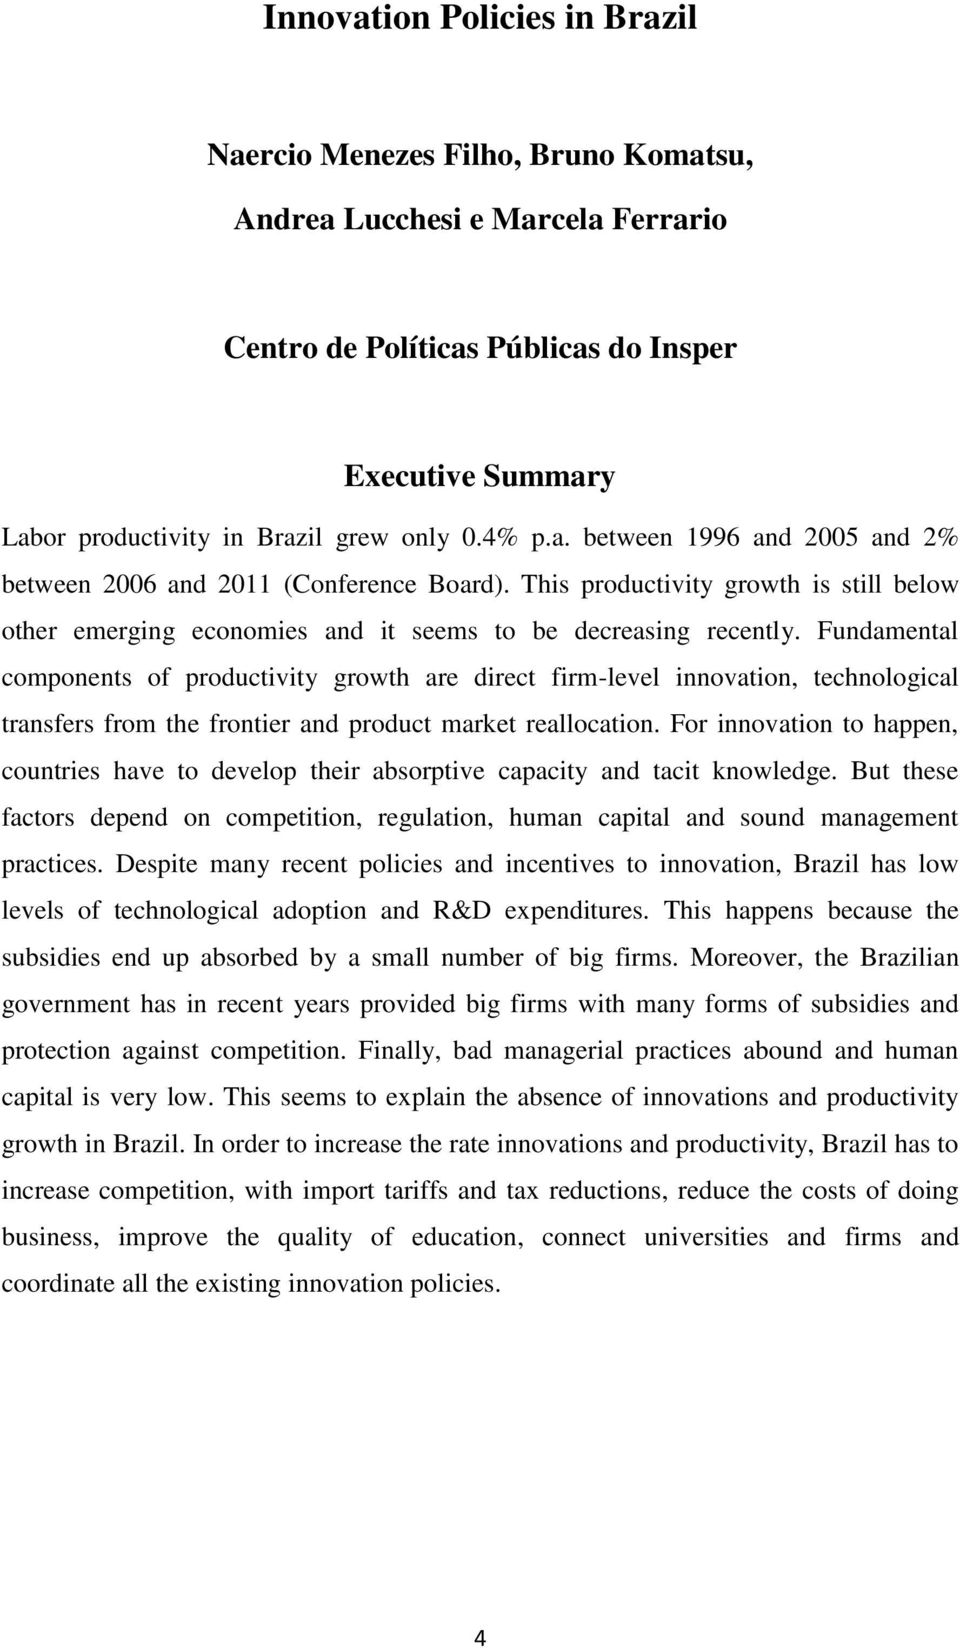 Fundamental components of productivity growth are direct firm-level innovation, technological transfers from the frontier and product market reallocation.